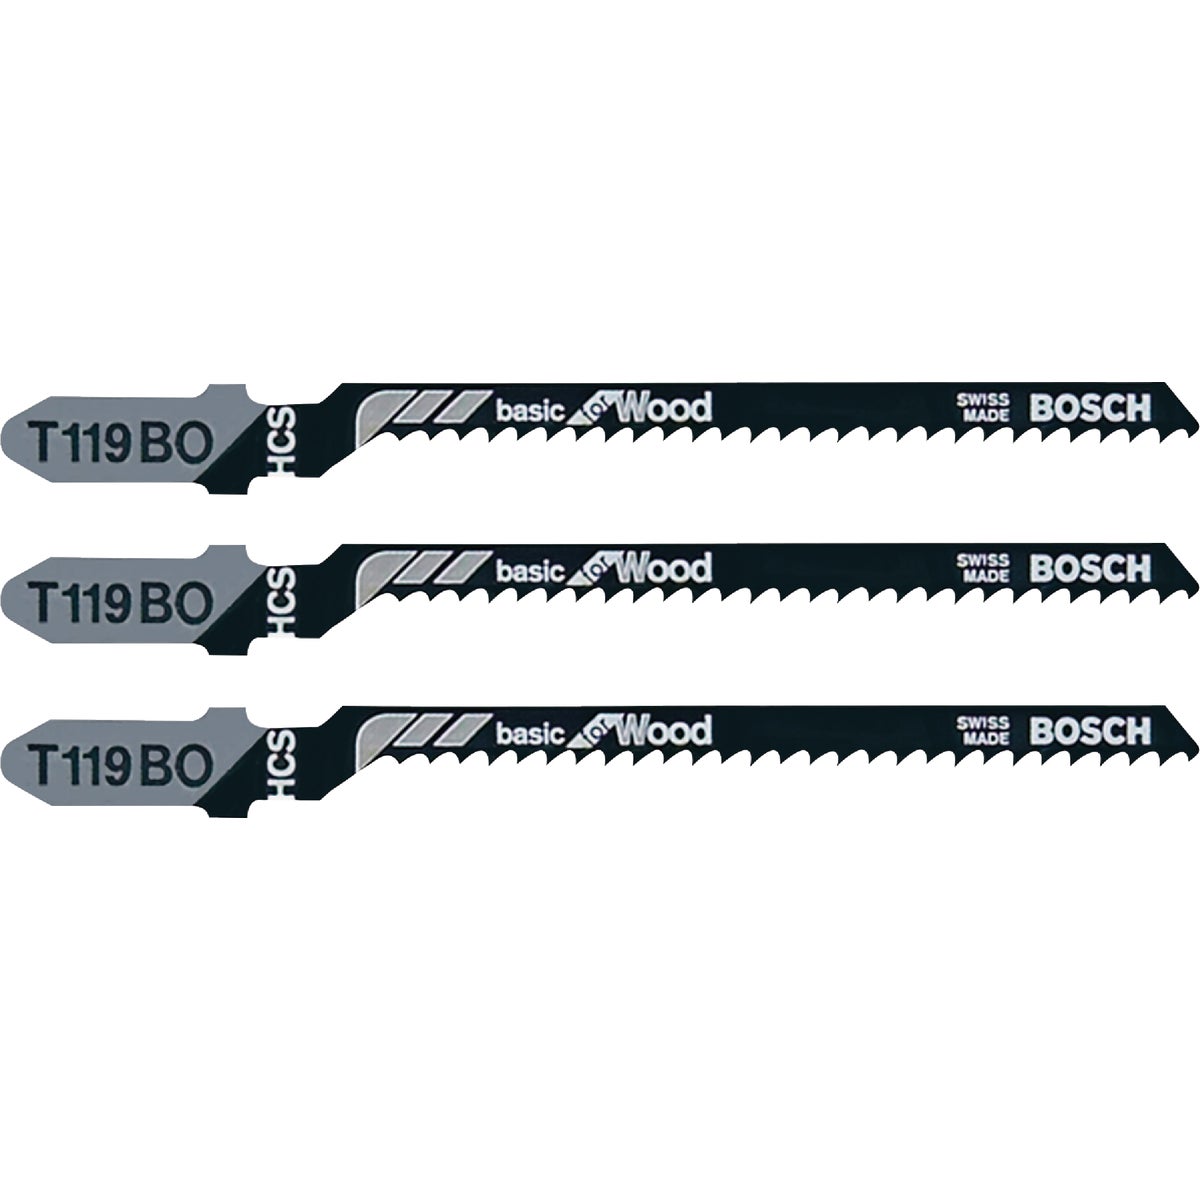 Item 334987, T-shank design for maximum grip and stability which fits 90% of all current